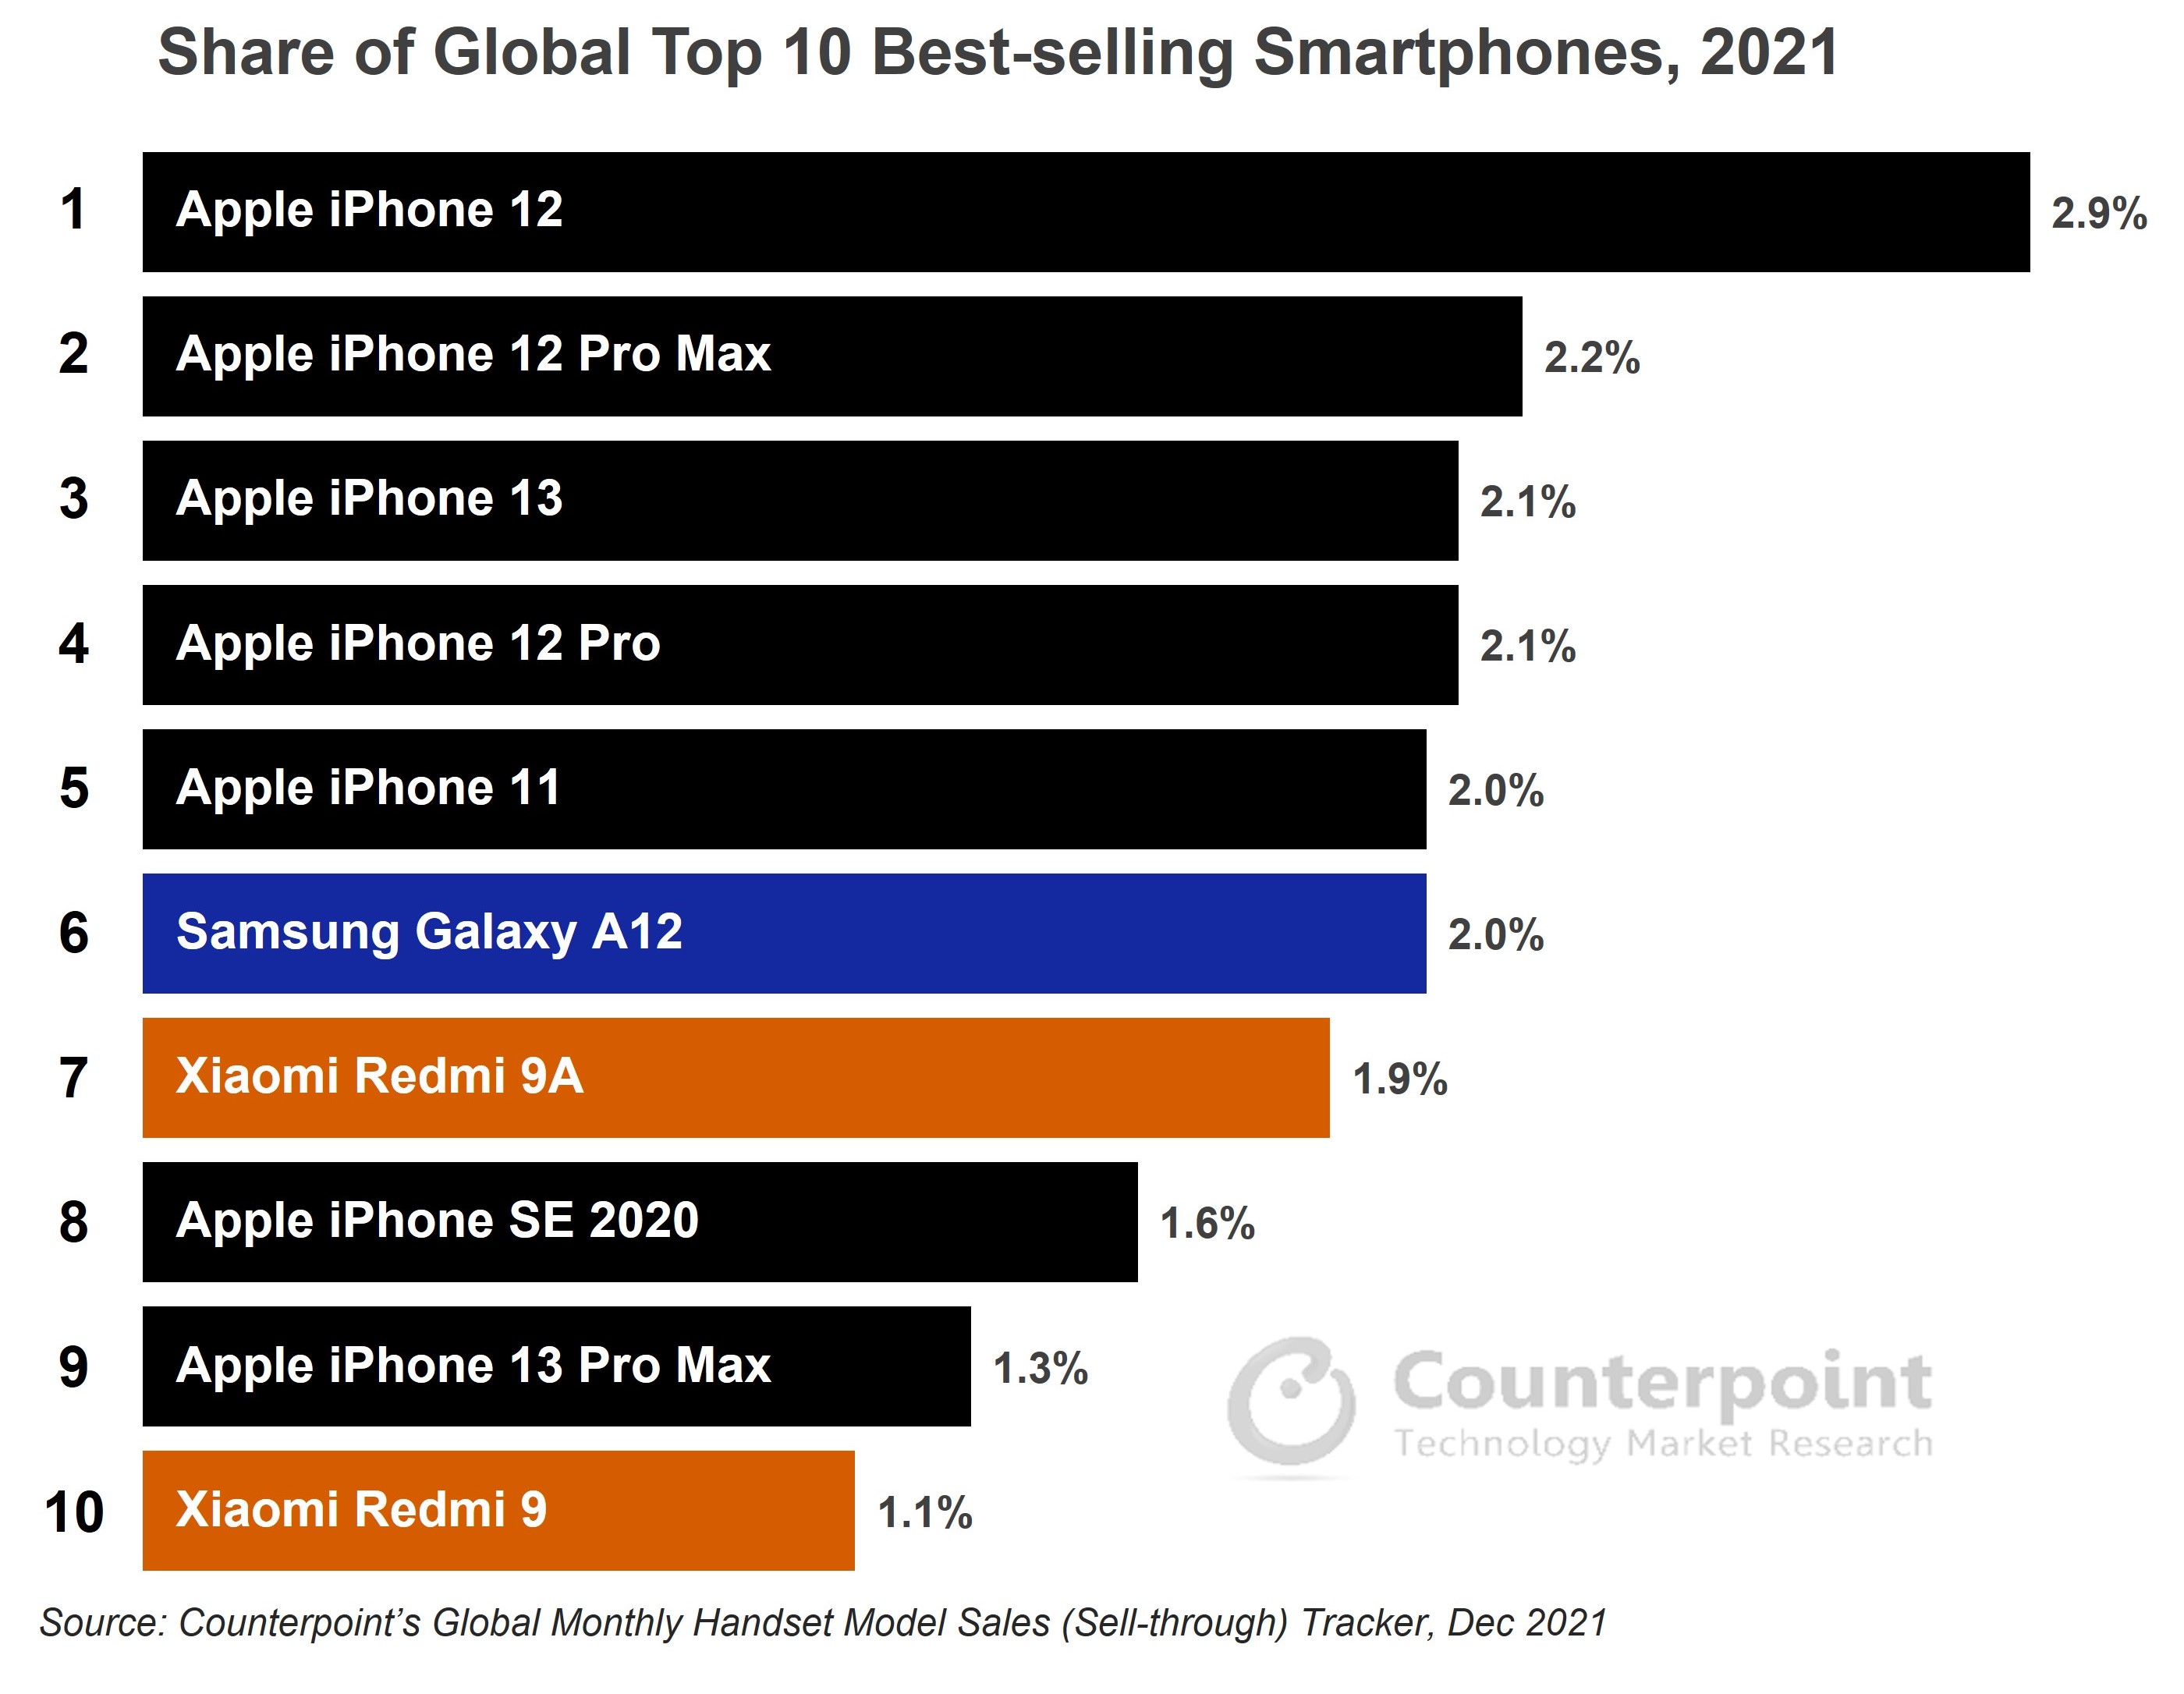 Counterpoint Research Global Top 10 Best-selling Smartphones 2021